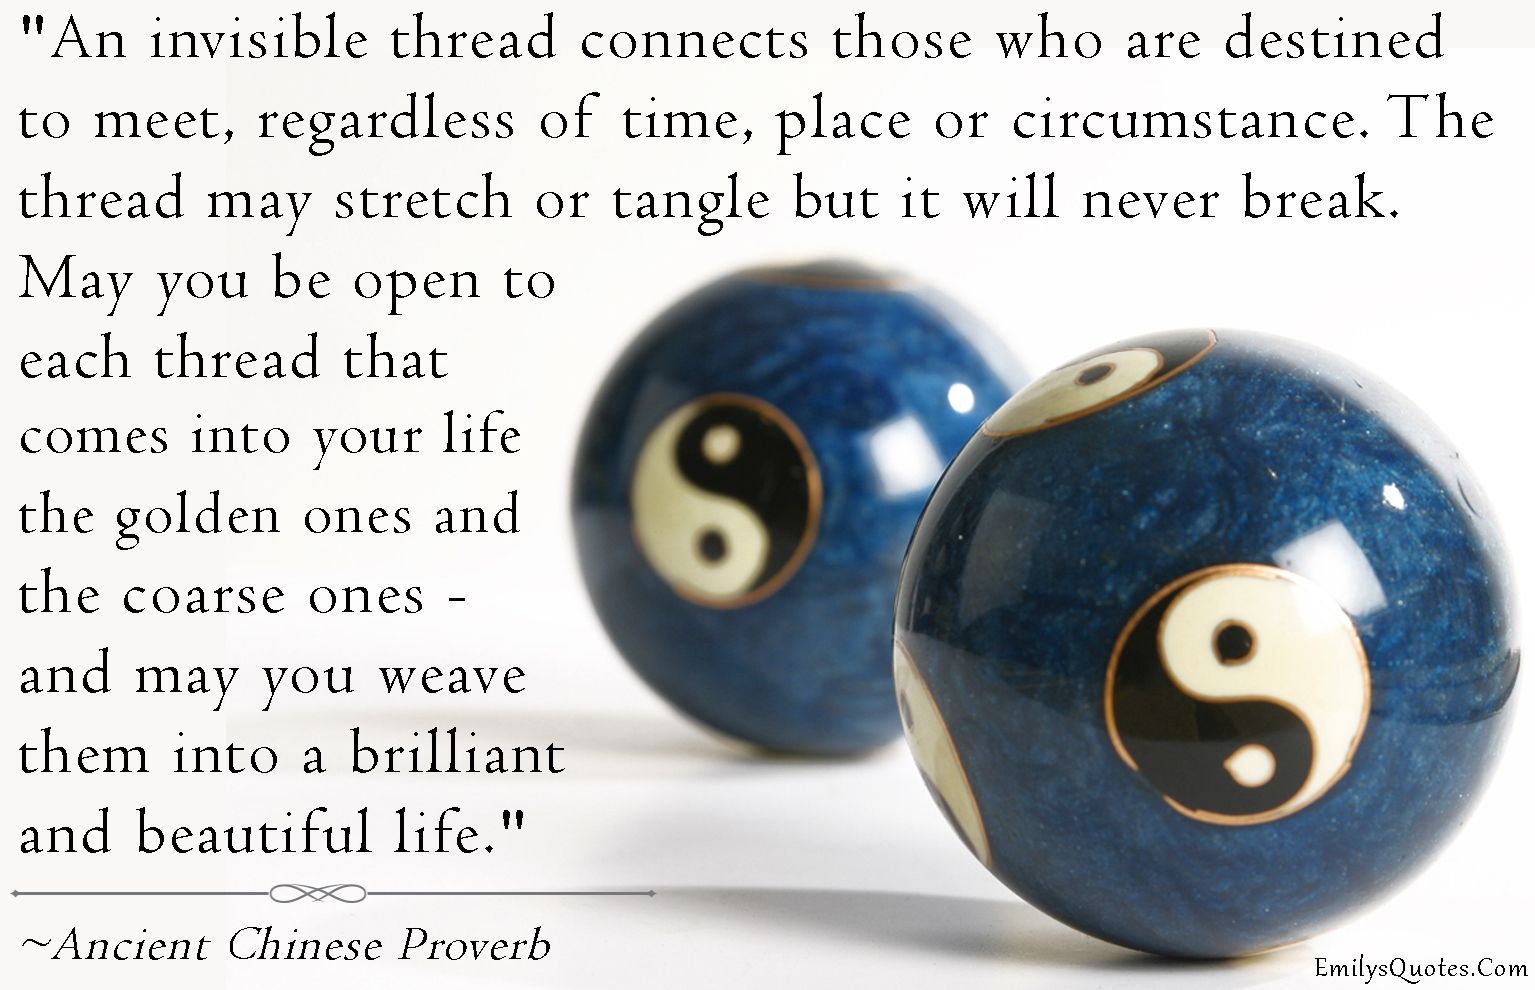 An invisible thread connects those who are destined to meet, regardless of time, place or circumstance. The thread may stretch or tangle but it will never break. May you be open to each thread that comes into your life – the golden ones and the coarse ones – and may you weave them into a brilliant and beautiful life